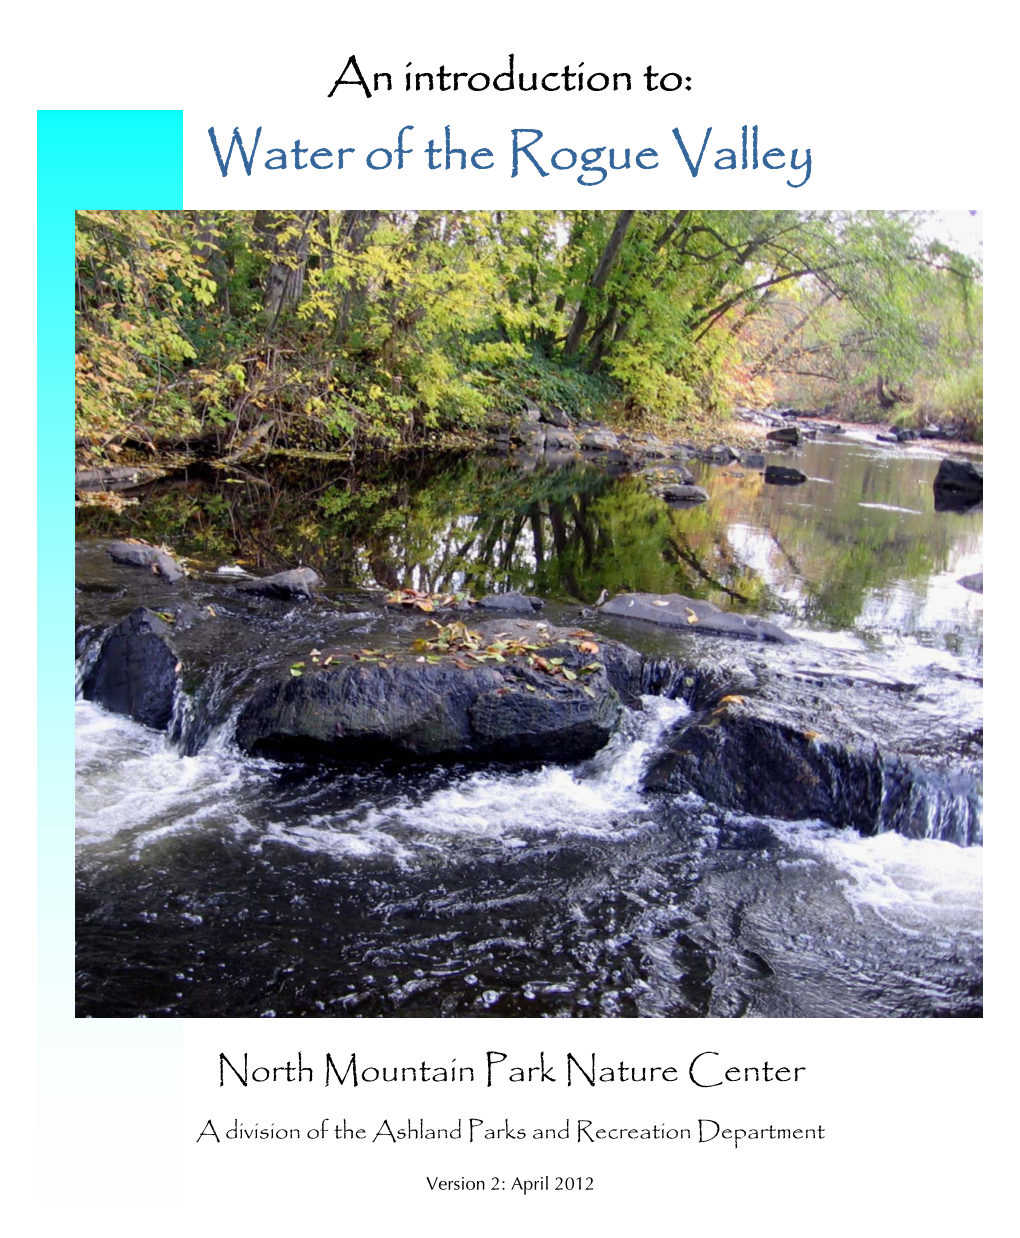 Water of the Rogue Valley